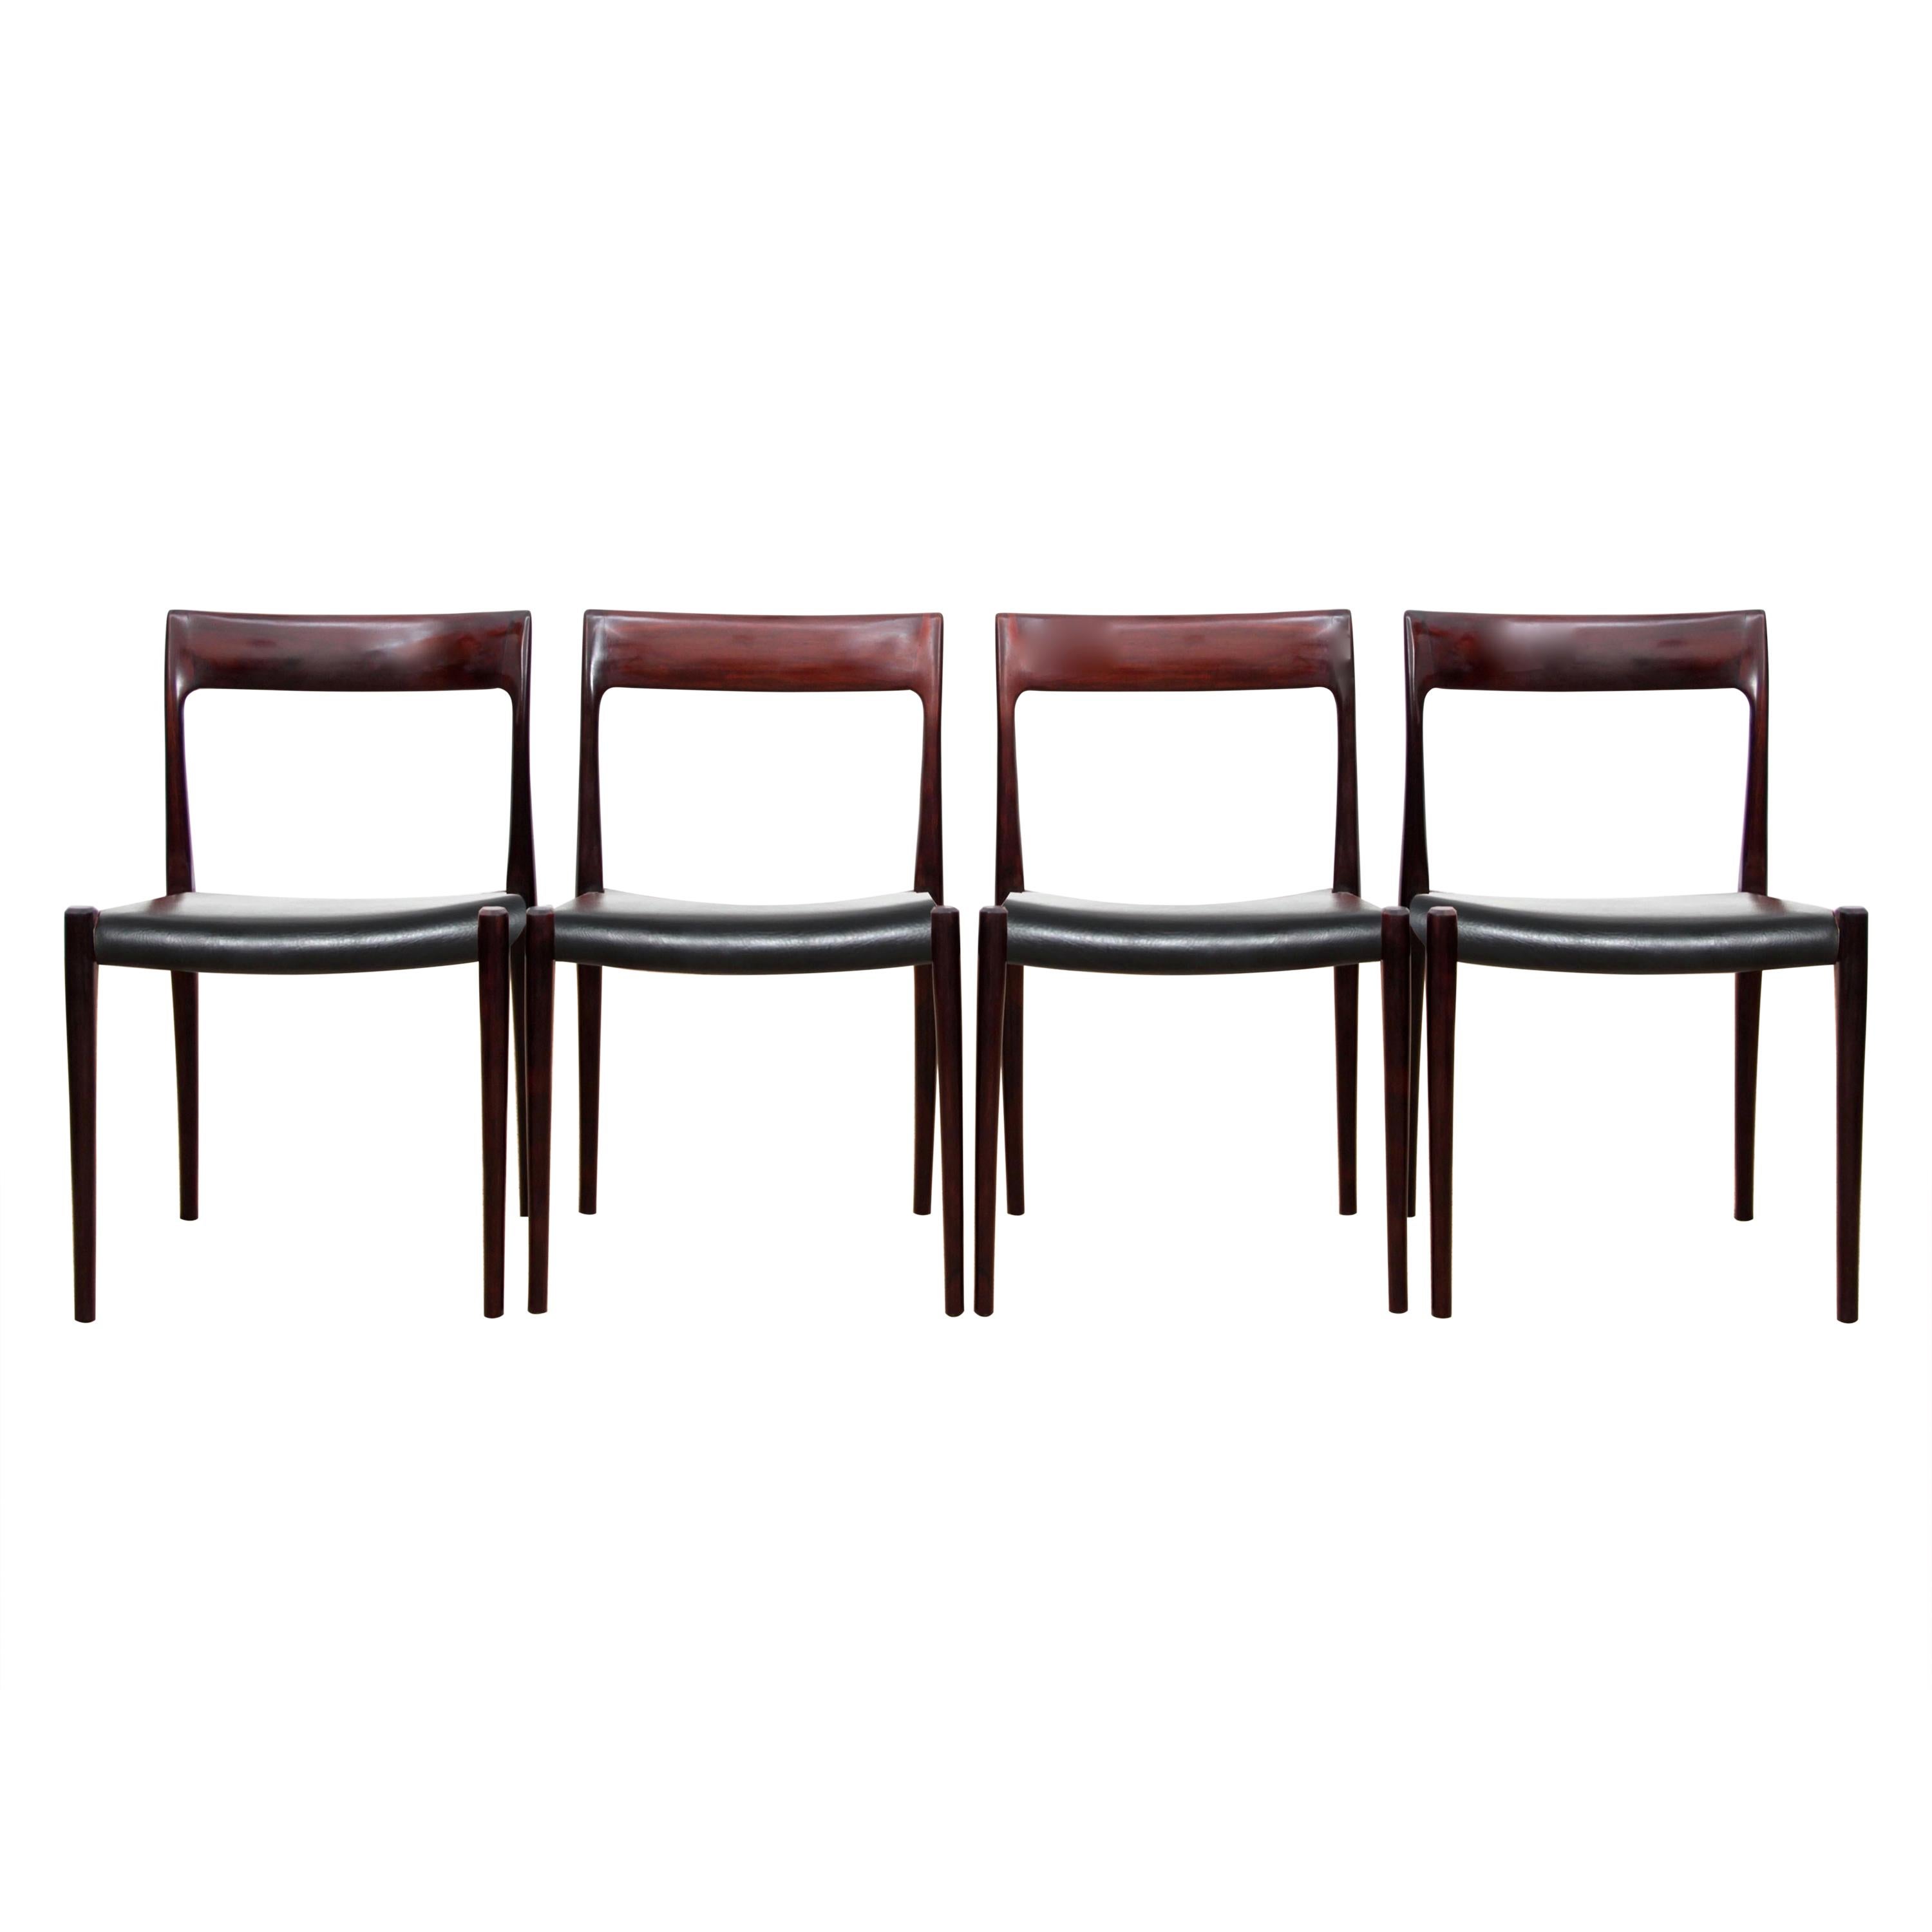 Mid-Century Modern Set of four Rosewood Dining Chairs by Niels Moller N°77